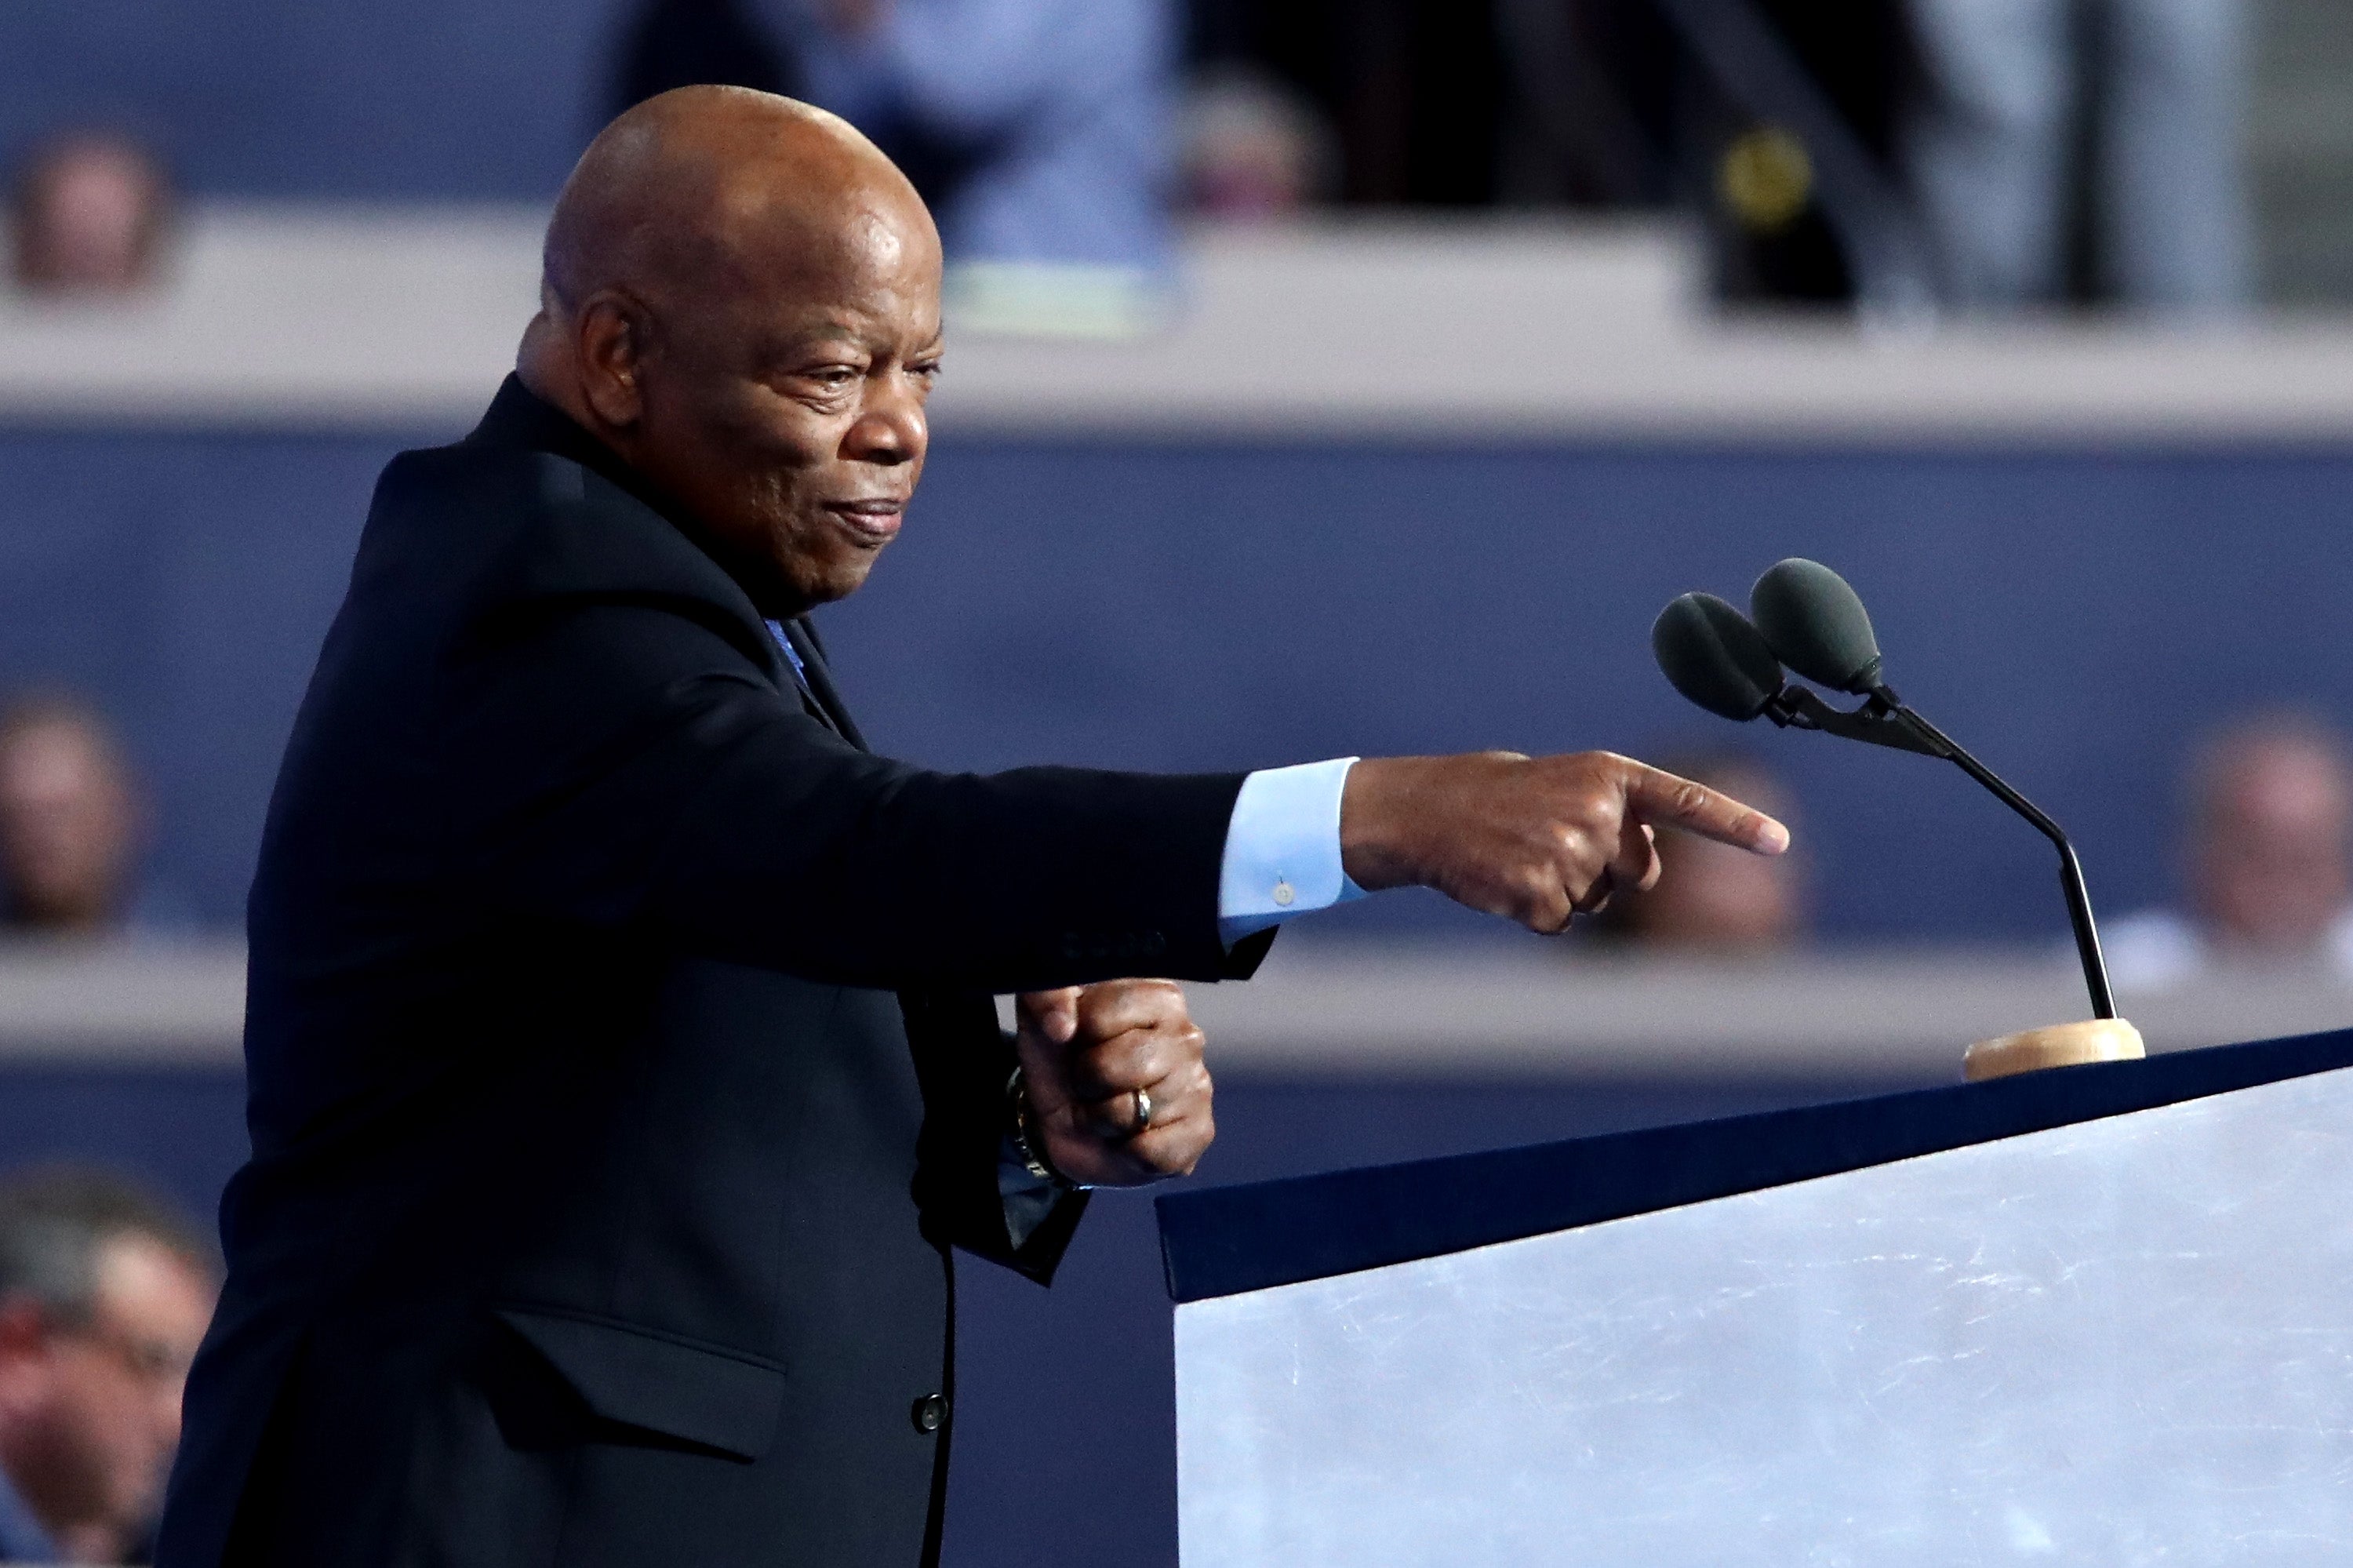 Congressman John Lewis Calls For Americans To Remember 'We Are One People' At Immigration Rally
